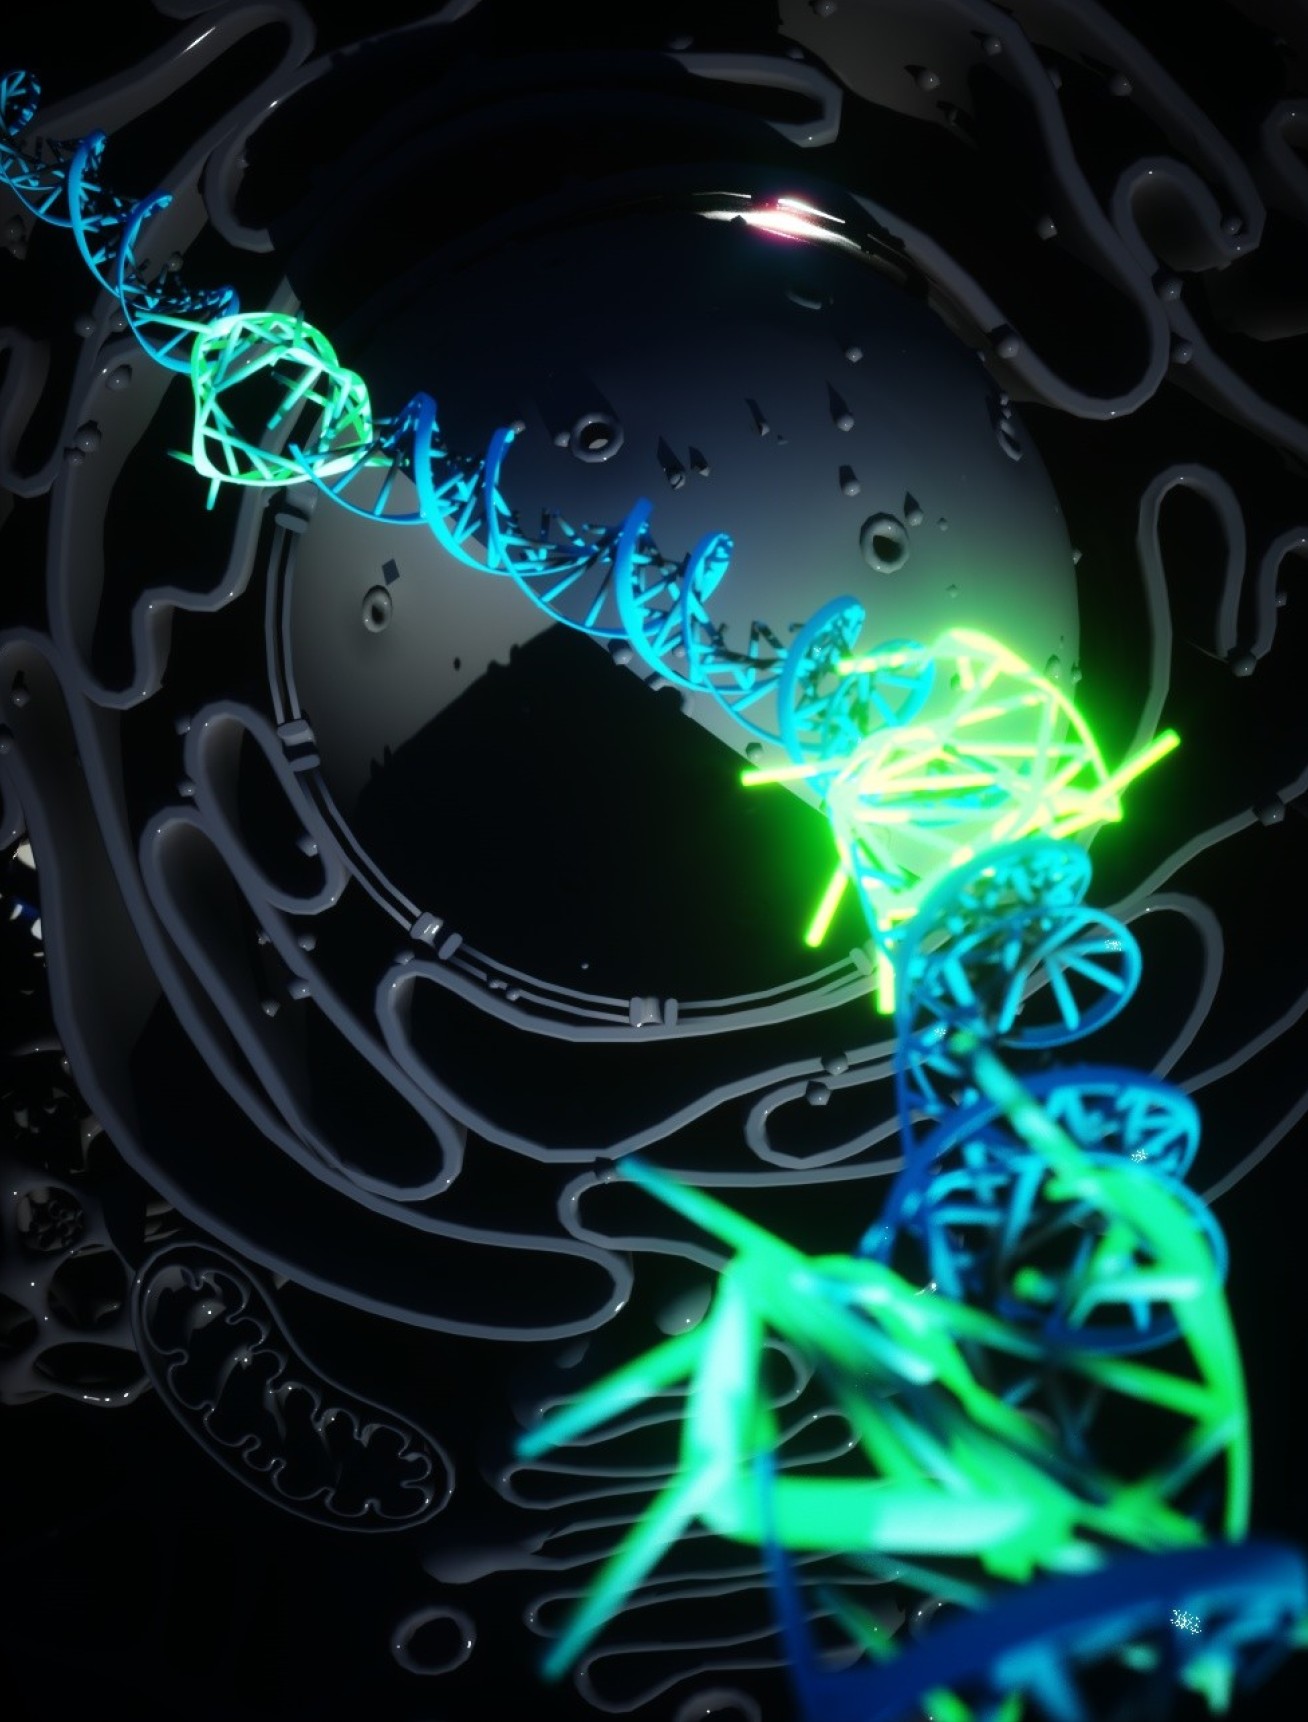 Illustration of quadruple helix DNA forming within normal double helix strands. The quadruple helix complexes are glowing